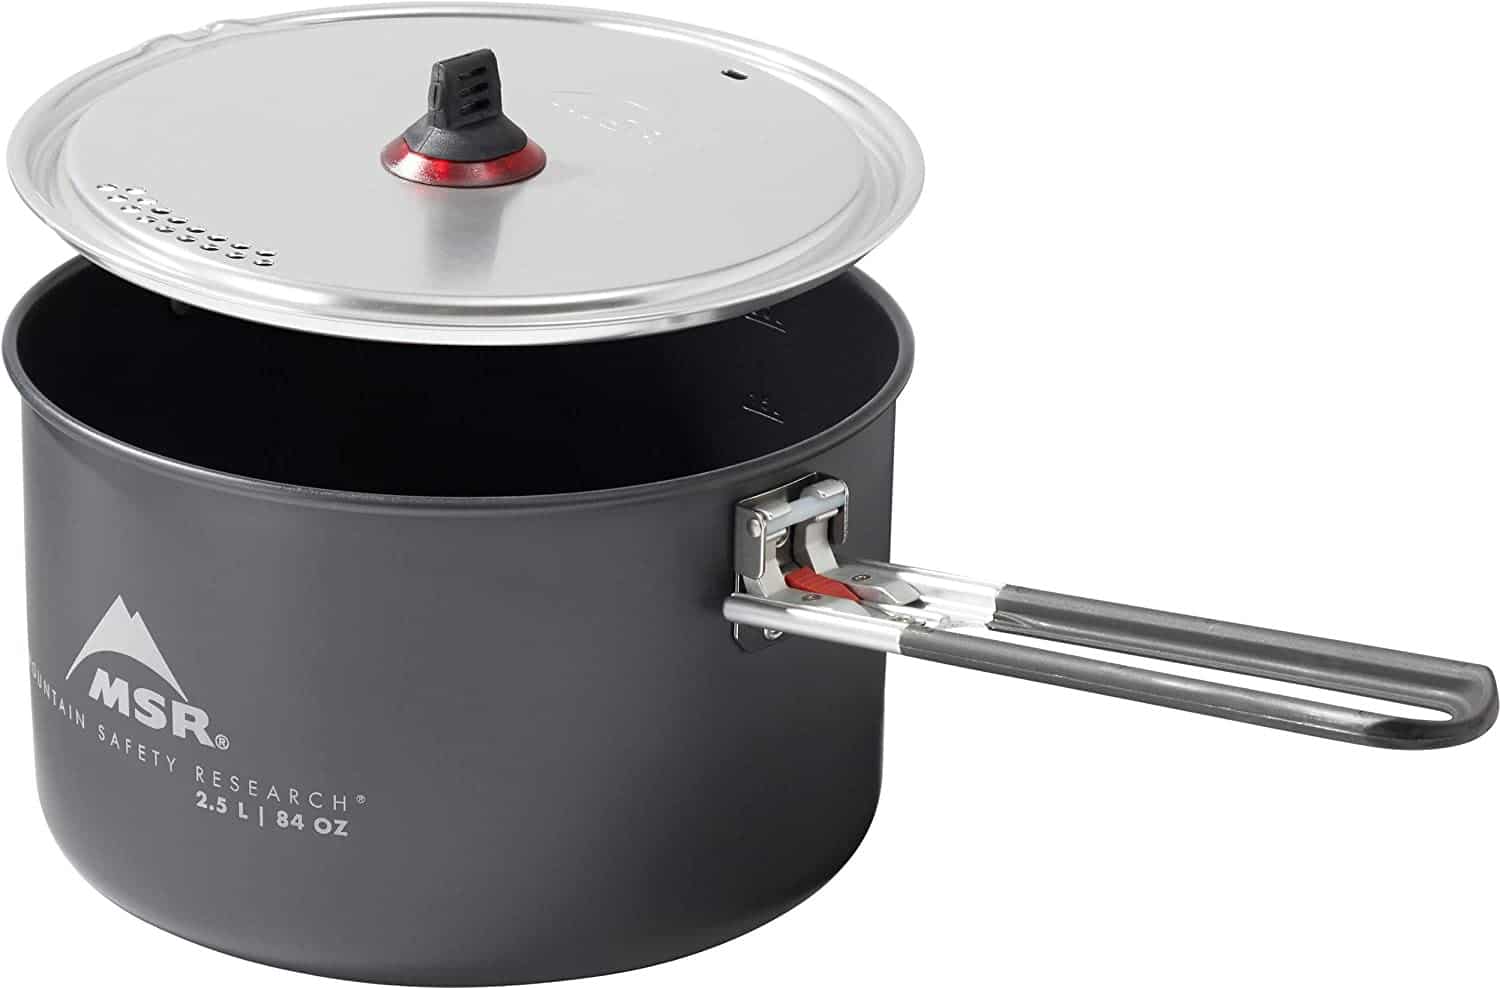 MSR Ceramic Coated Solo Camping Cook Pot